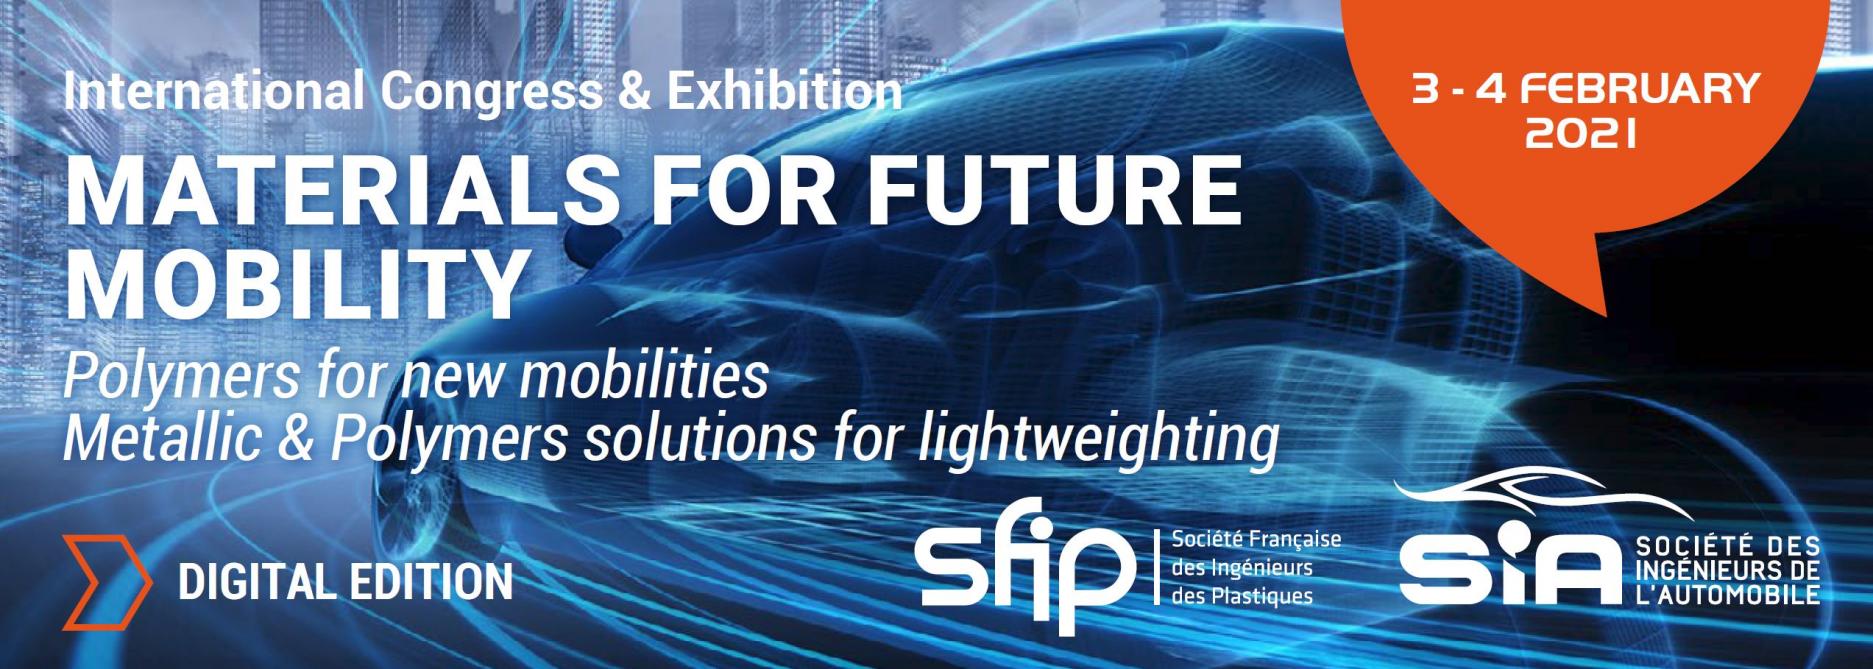 SIA-SFIP 2021 Materials for future mobility conference banner